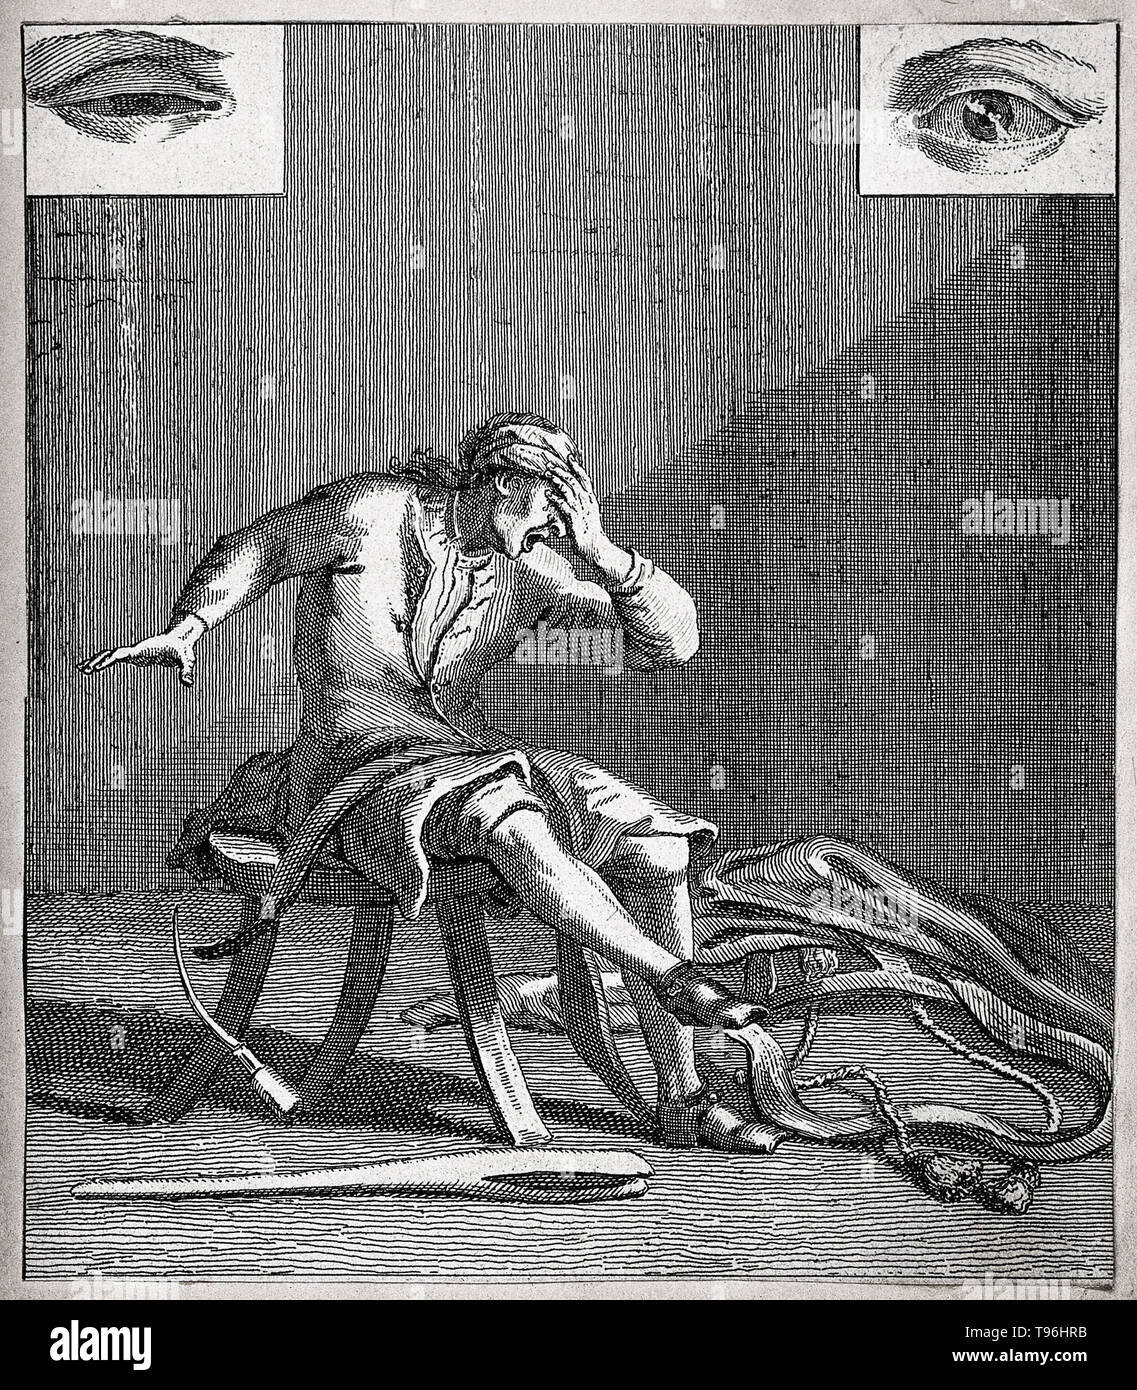 A man in a workshop with a hand over his eyes in anguish. A sharp tool drops from his other hand. Two details of eyes appear in the top corners, one of them injured. Line engraving. Stock Photo